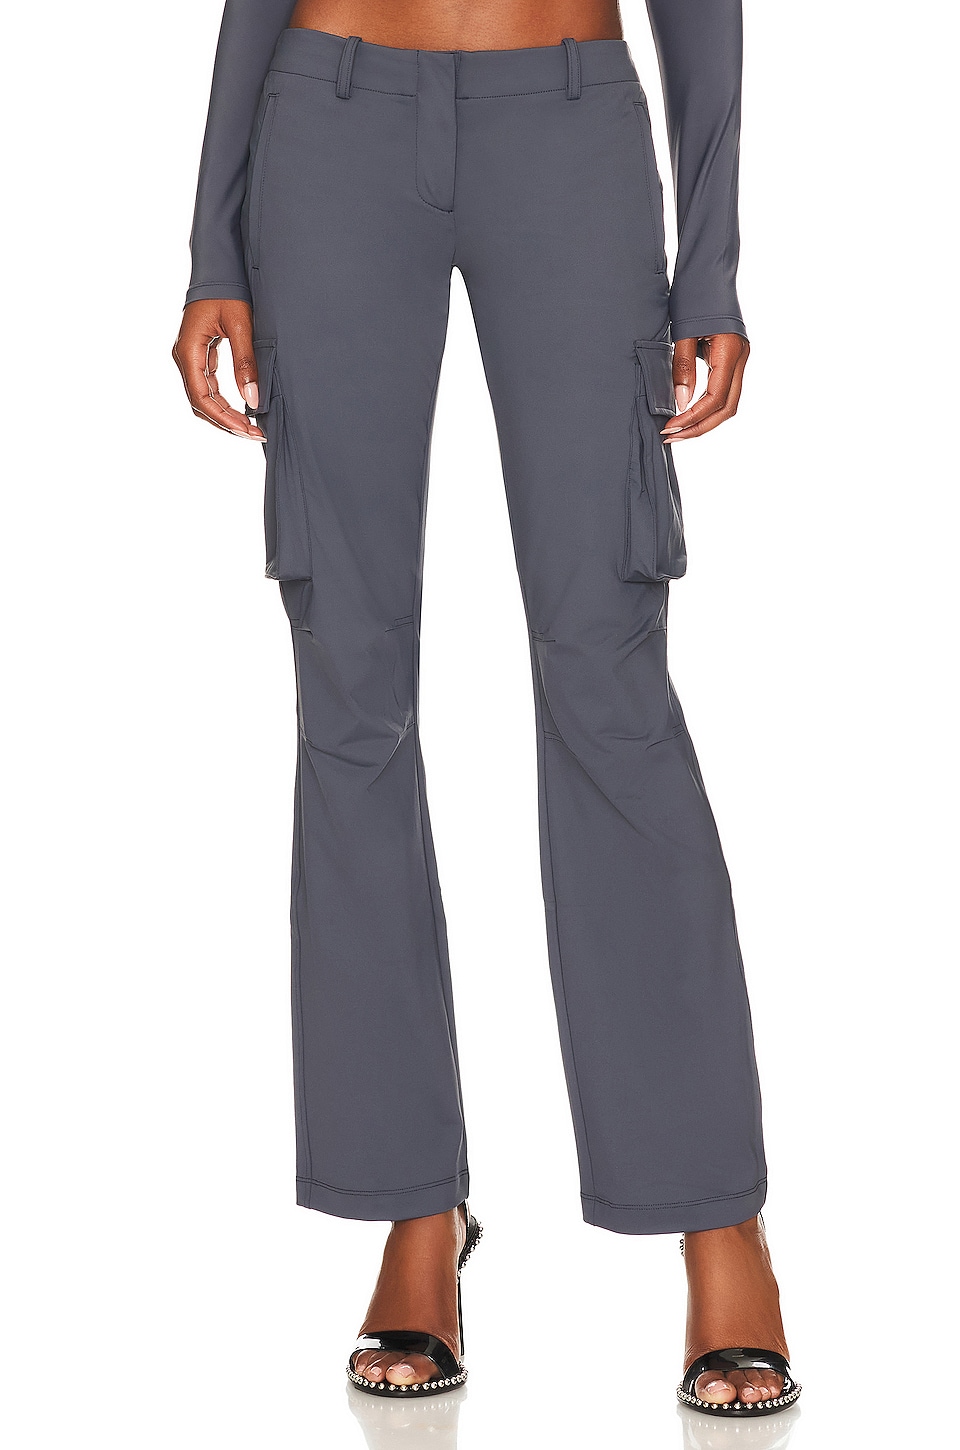 Miaou Raven Cargo Pant in Charcoal | REVOLVE